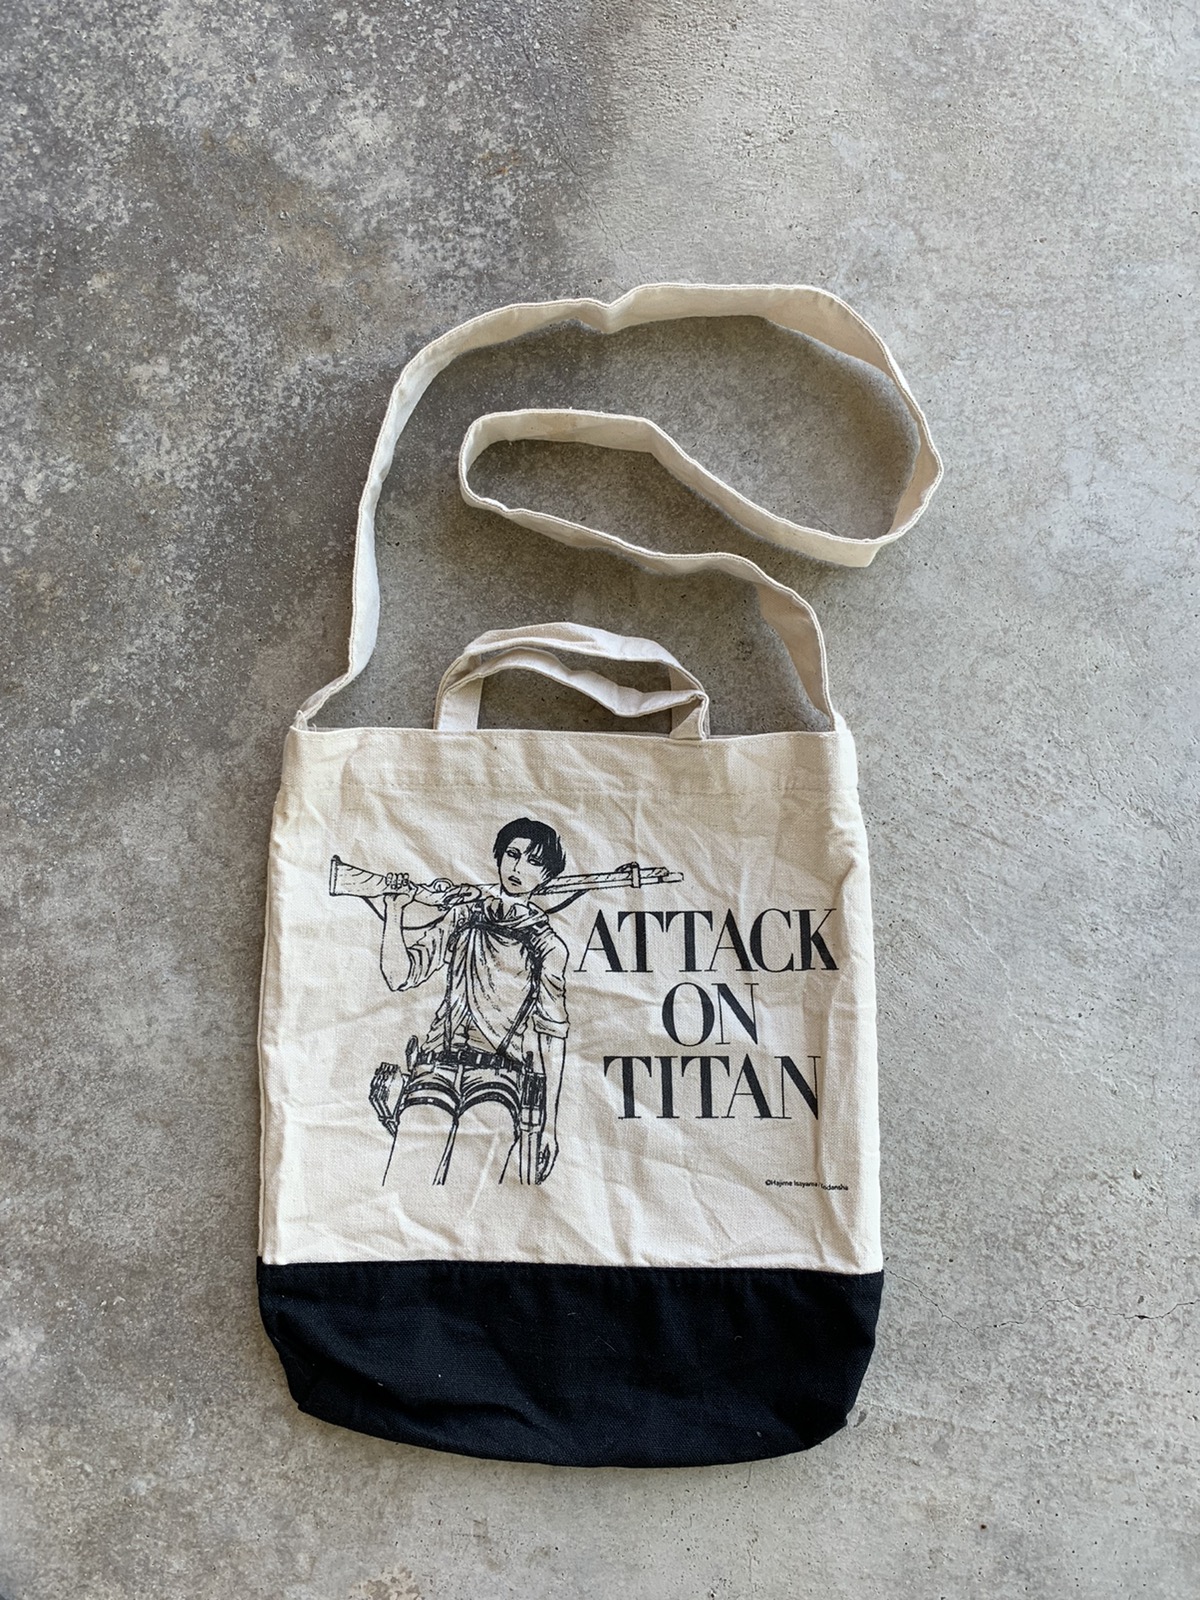 Beams Anime Attack of the titans Levi Totebag - 1